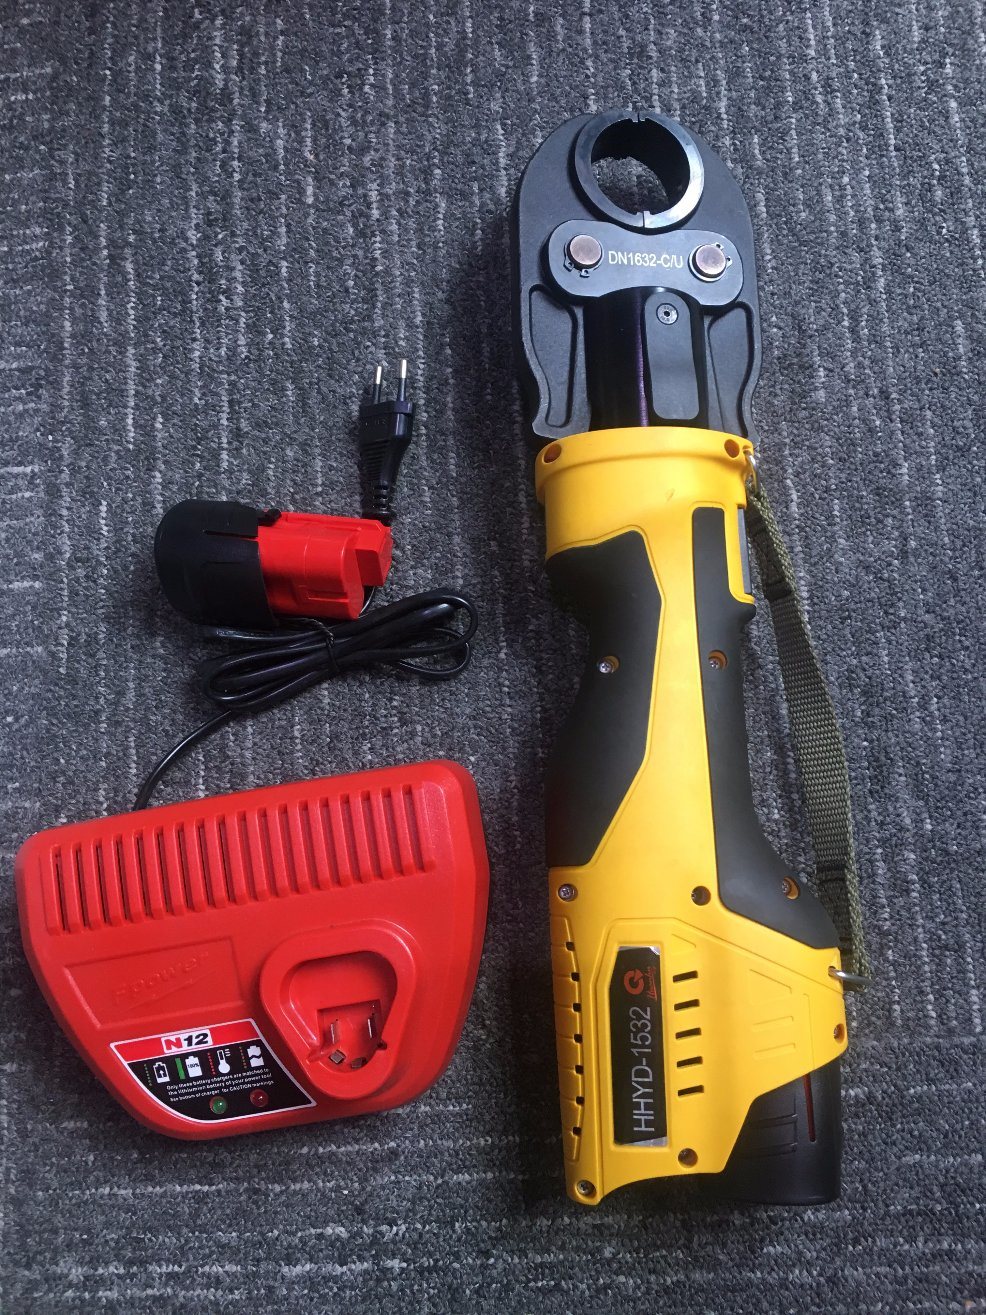 Hhyd-1532 Electrical Hydraulic Pex Crimping Tool Plumbing Crimping Tool for Stainless Steel Tube, High Quality 